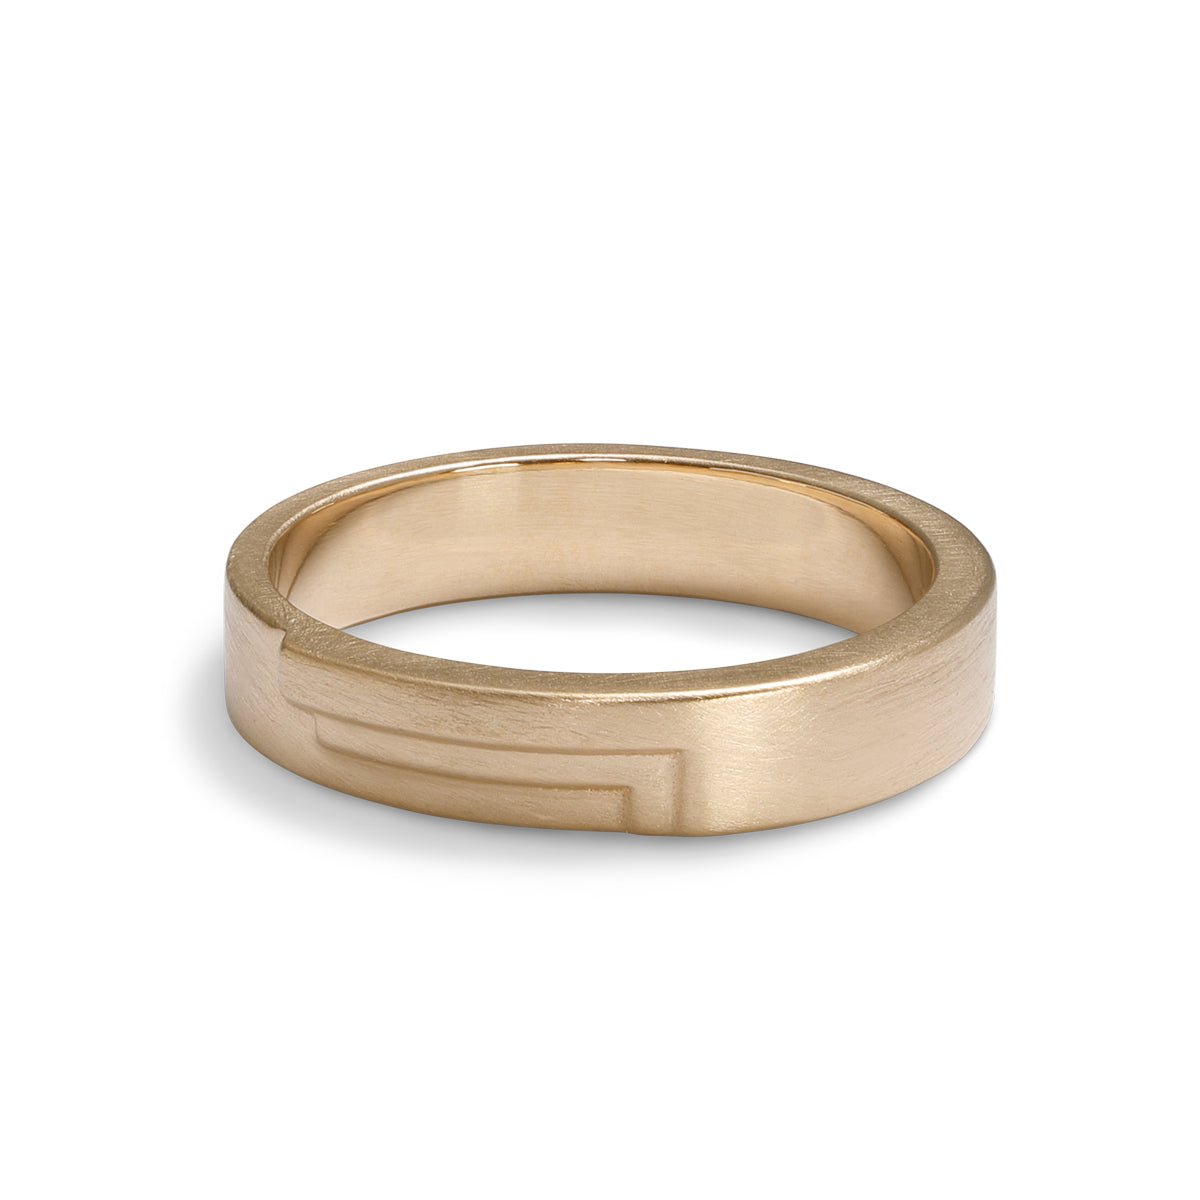 Women's Ethical Wedding Ring Collections - All You Need to Know - Lebrusan  Studio